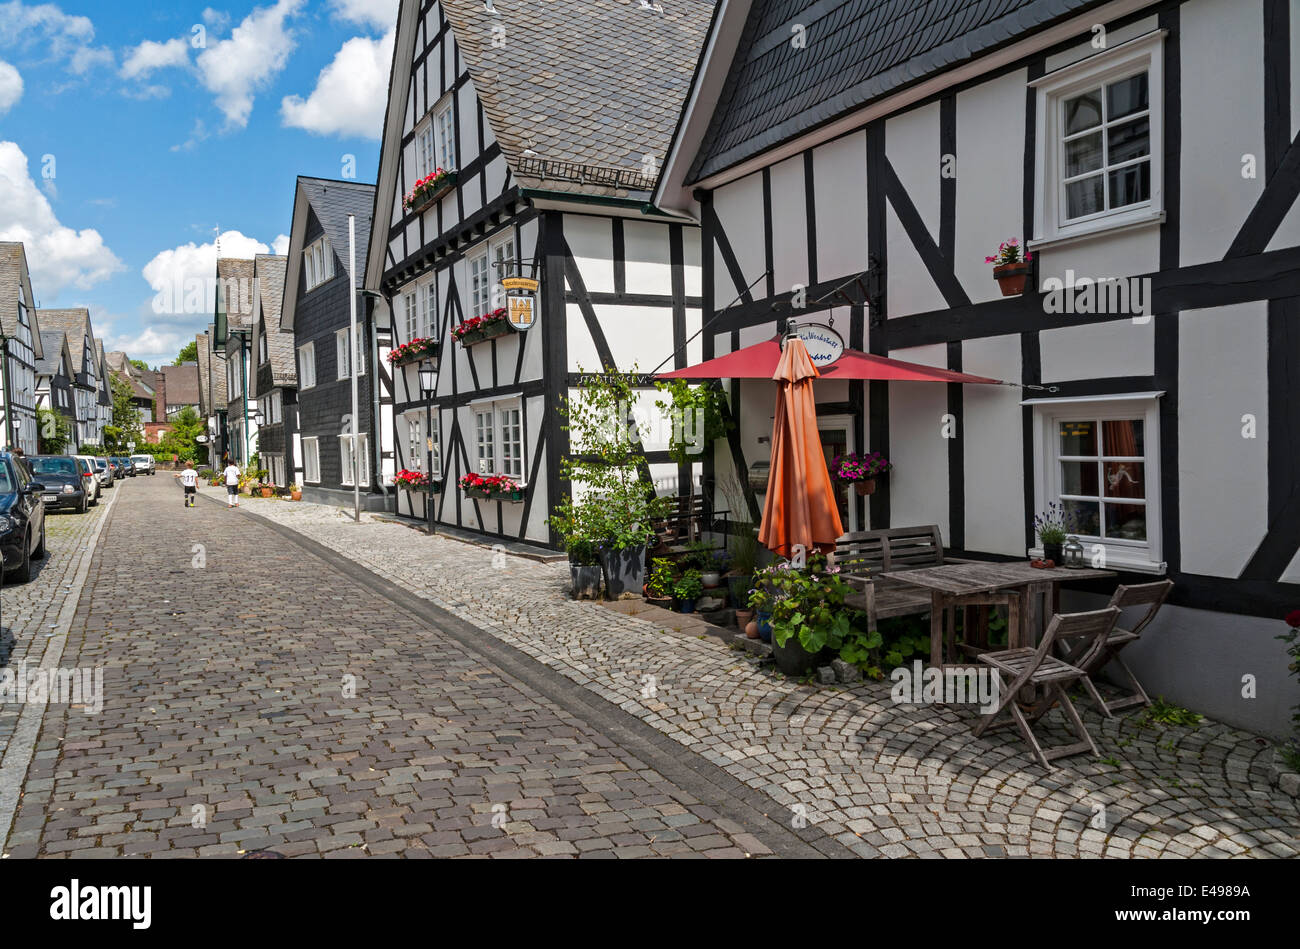 Freudenberg, houses in the old town, NRW Germany Stock Photo